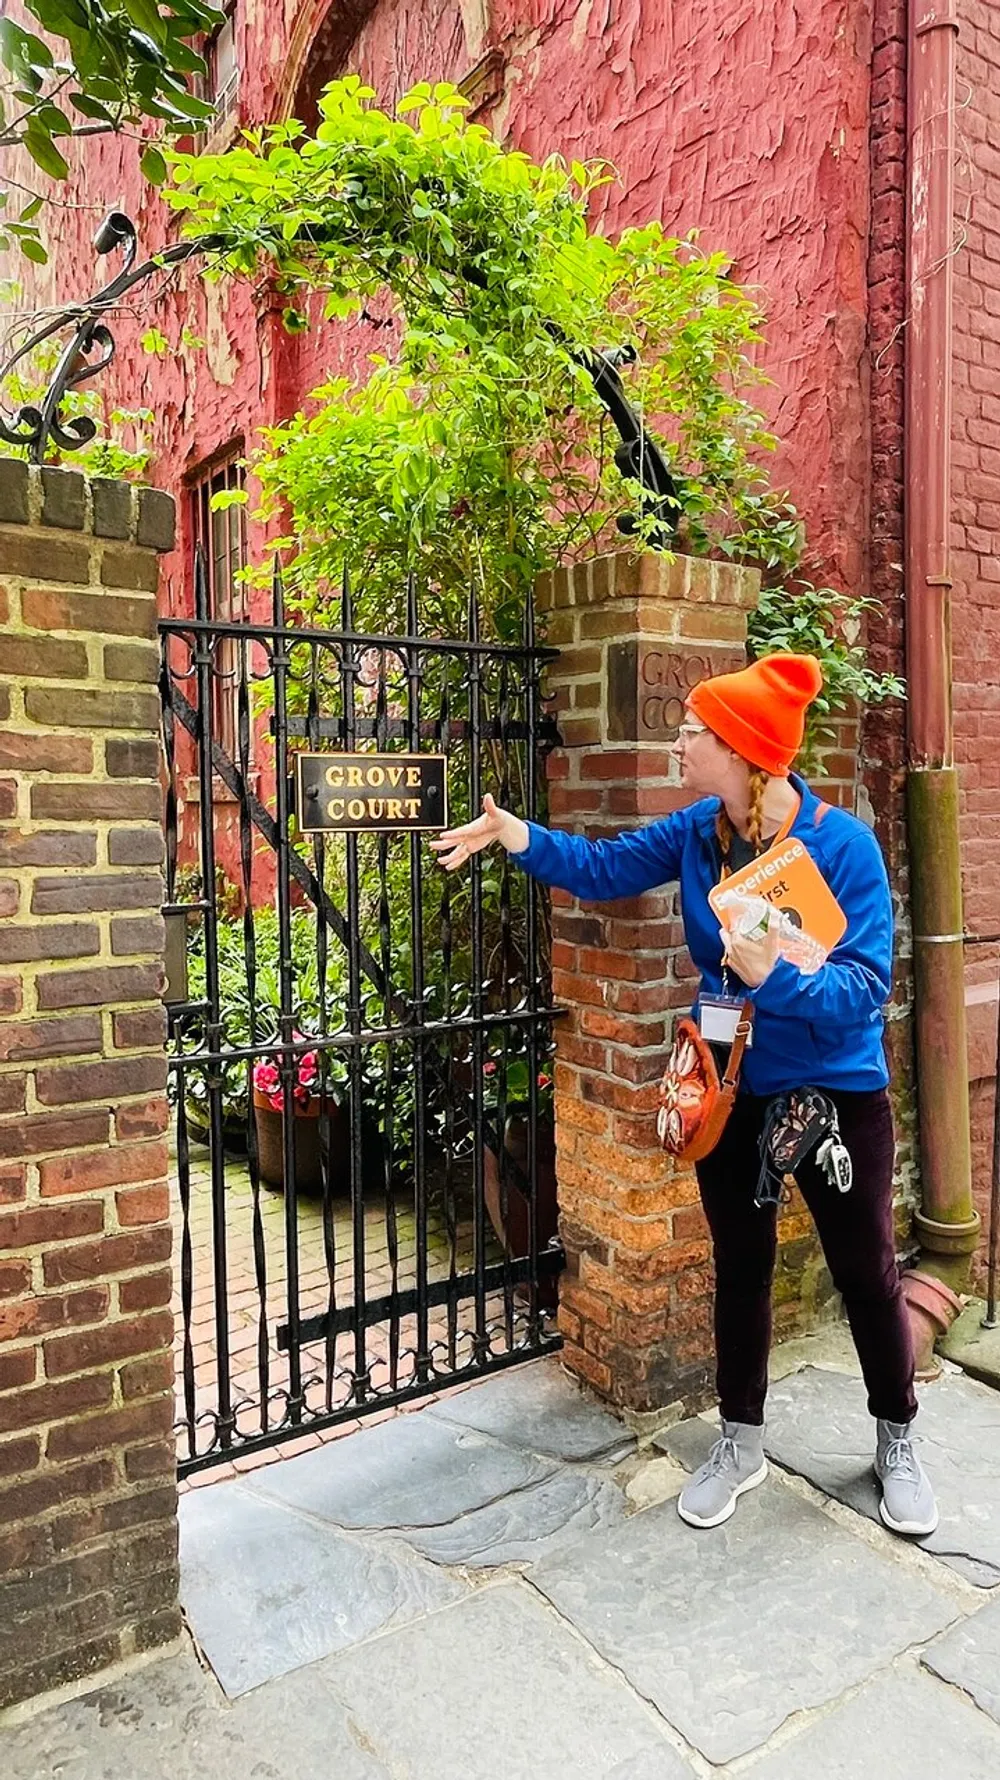 A person in a bright orange beanie is pointing at the Grove Court sign on a black iron gate in front of a charming brick walled alcove with green plants